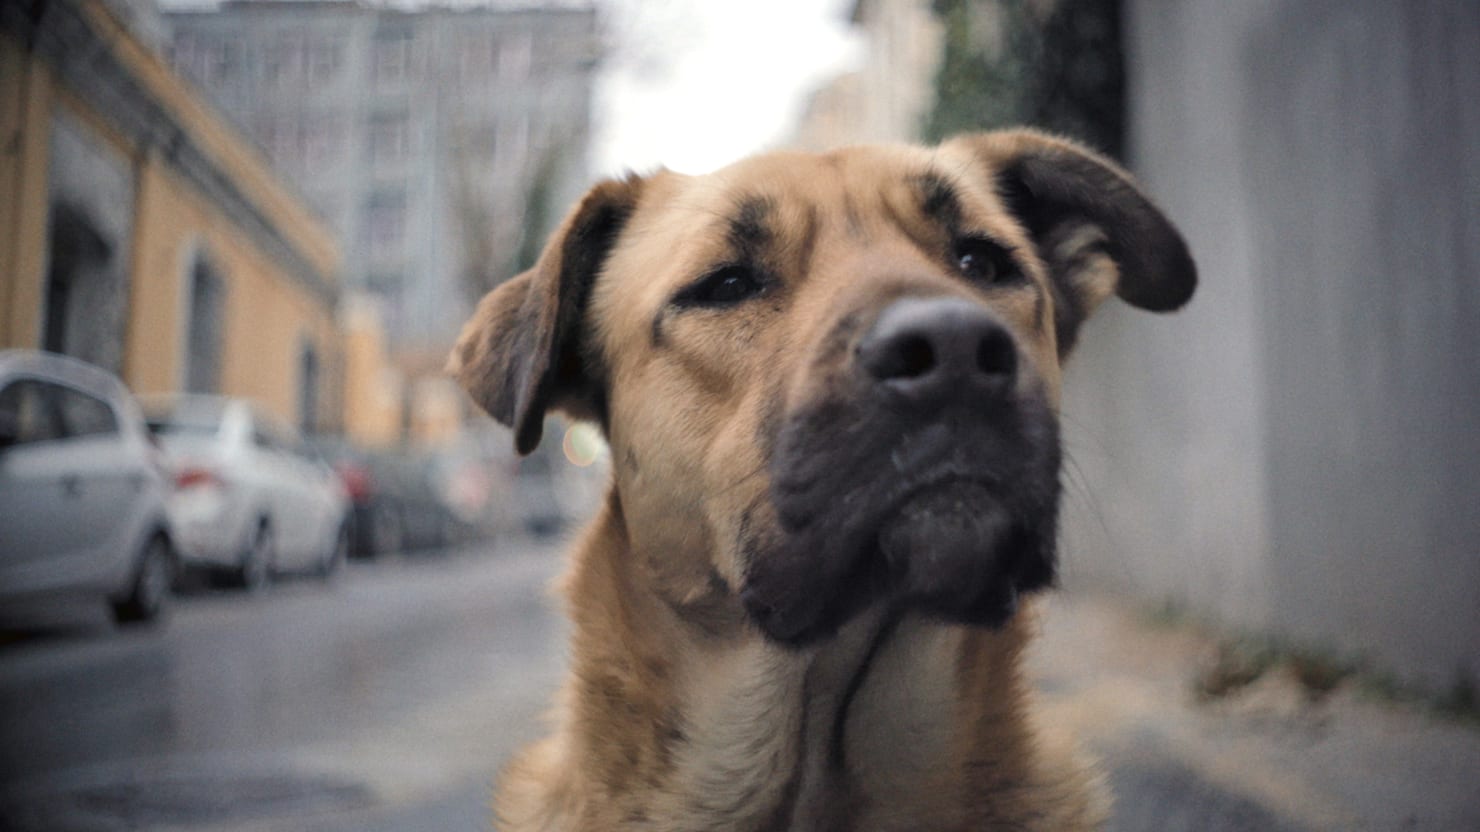 The city full of homeless dogs struggling to survive